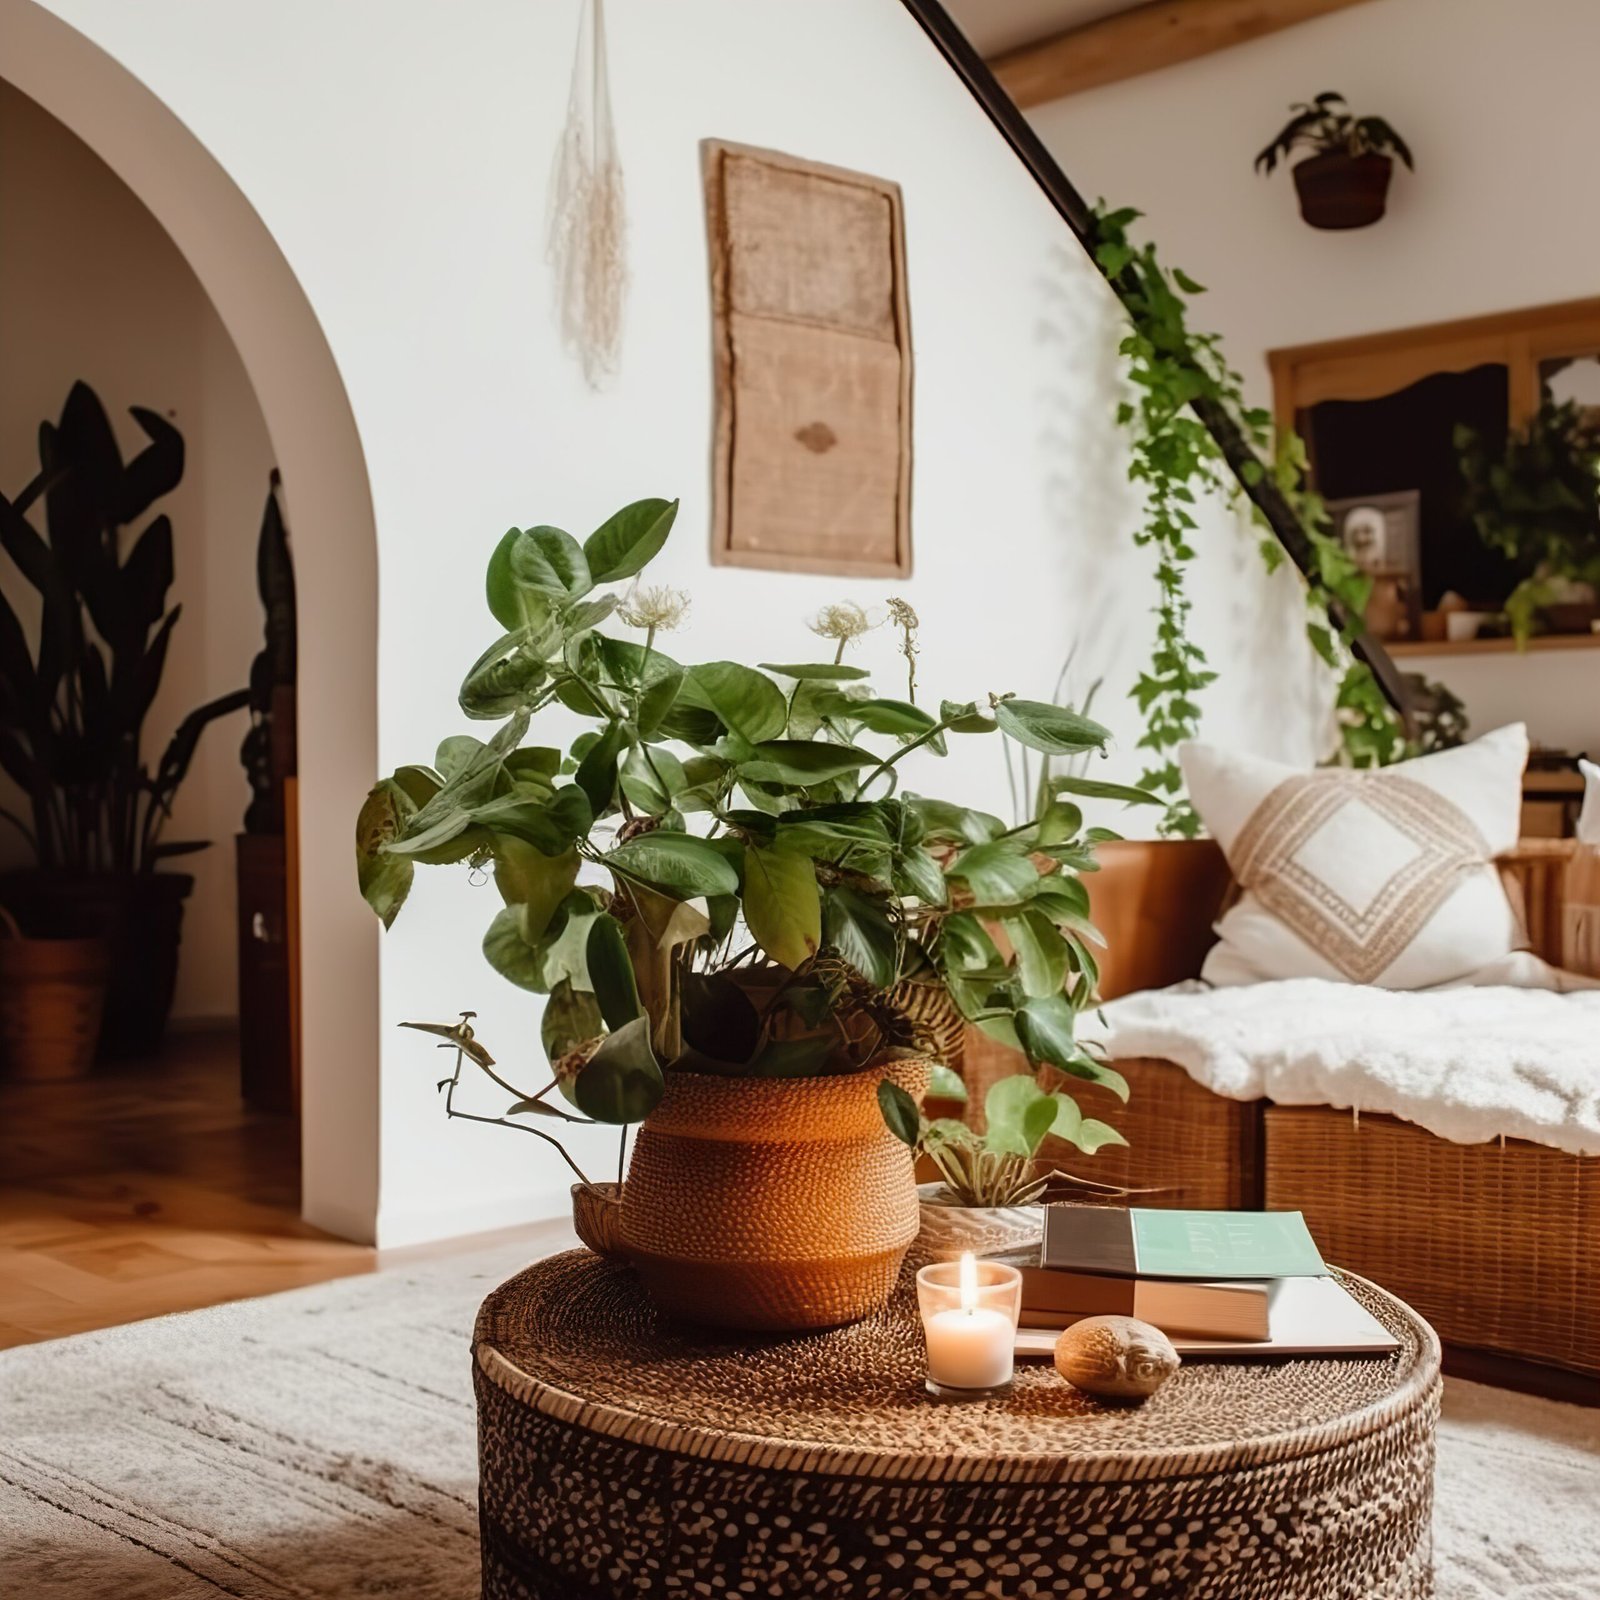 Boho styled room interior, green houseplants and natural home decor daylight shot.